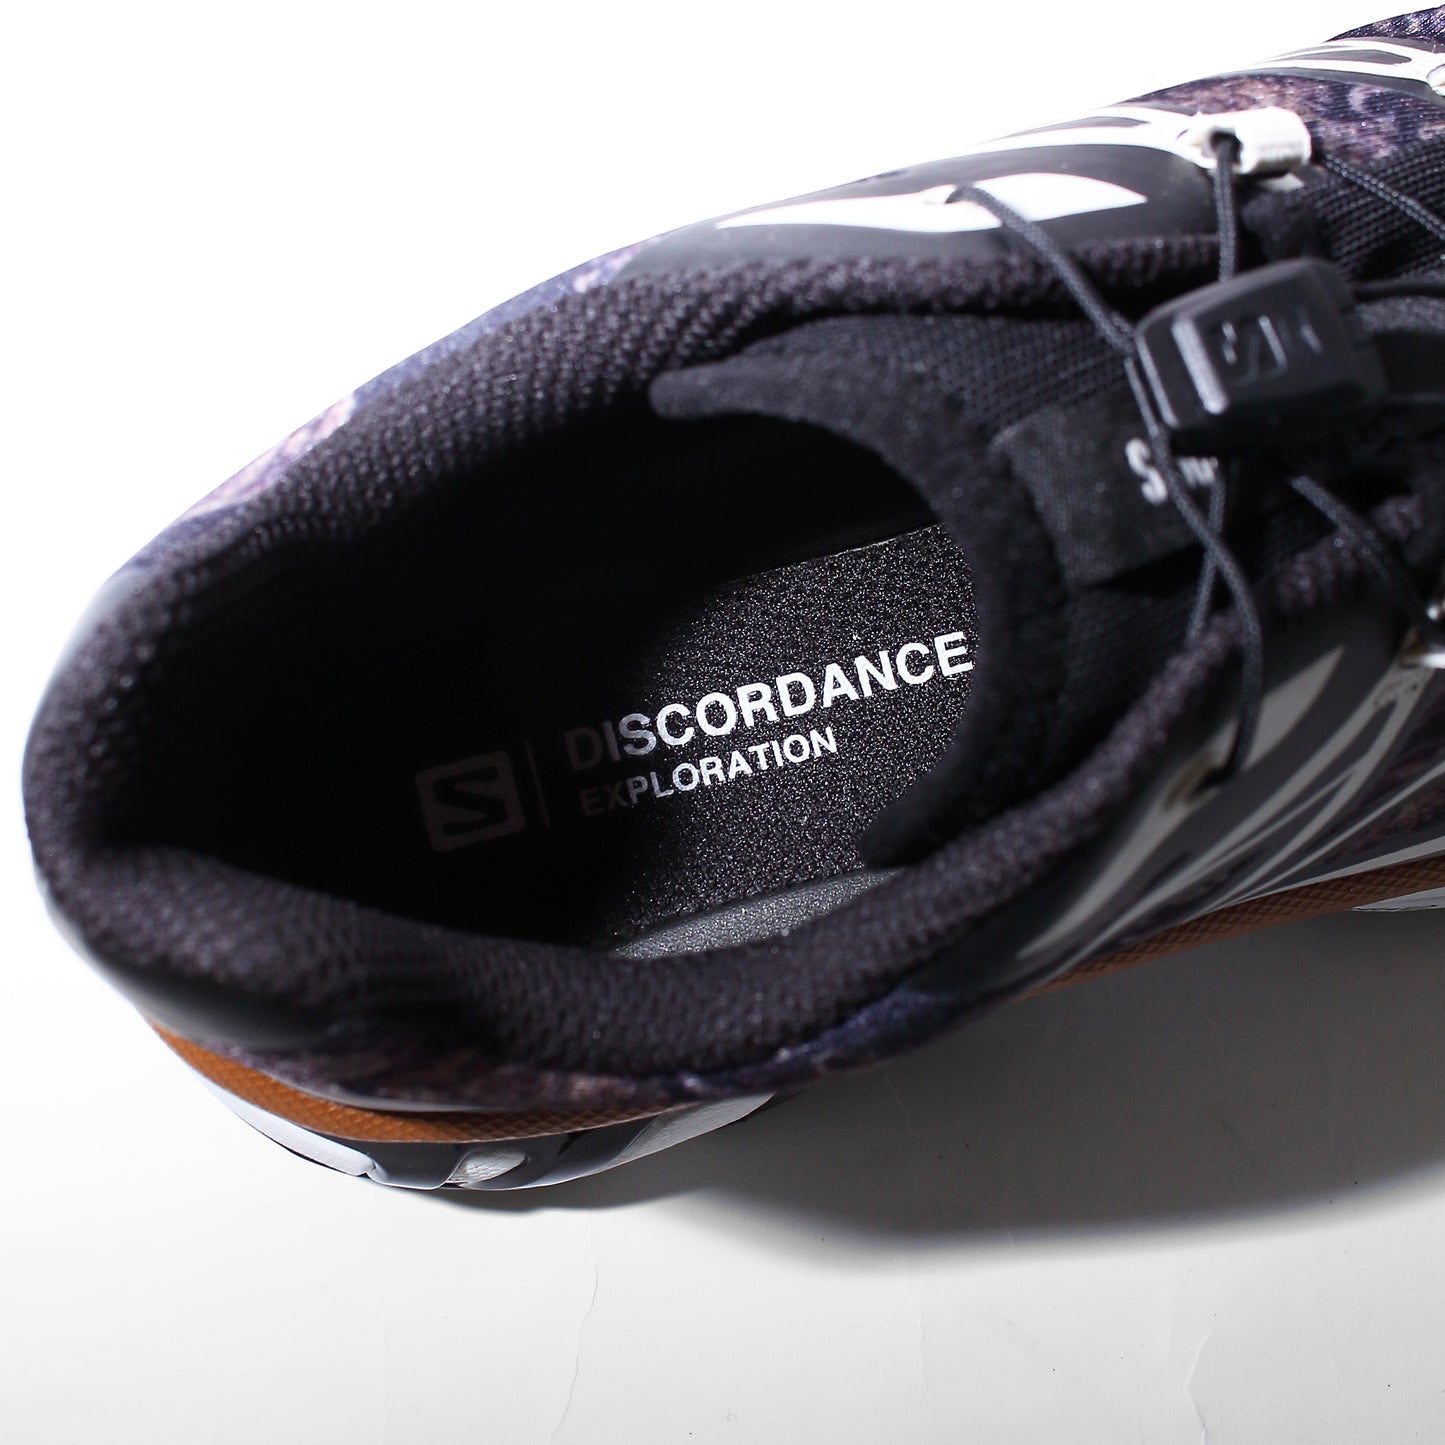 SALOMON XT-6 × Children of the discordance For COSTS release